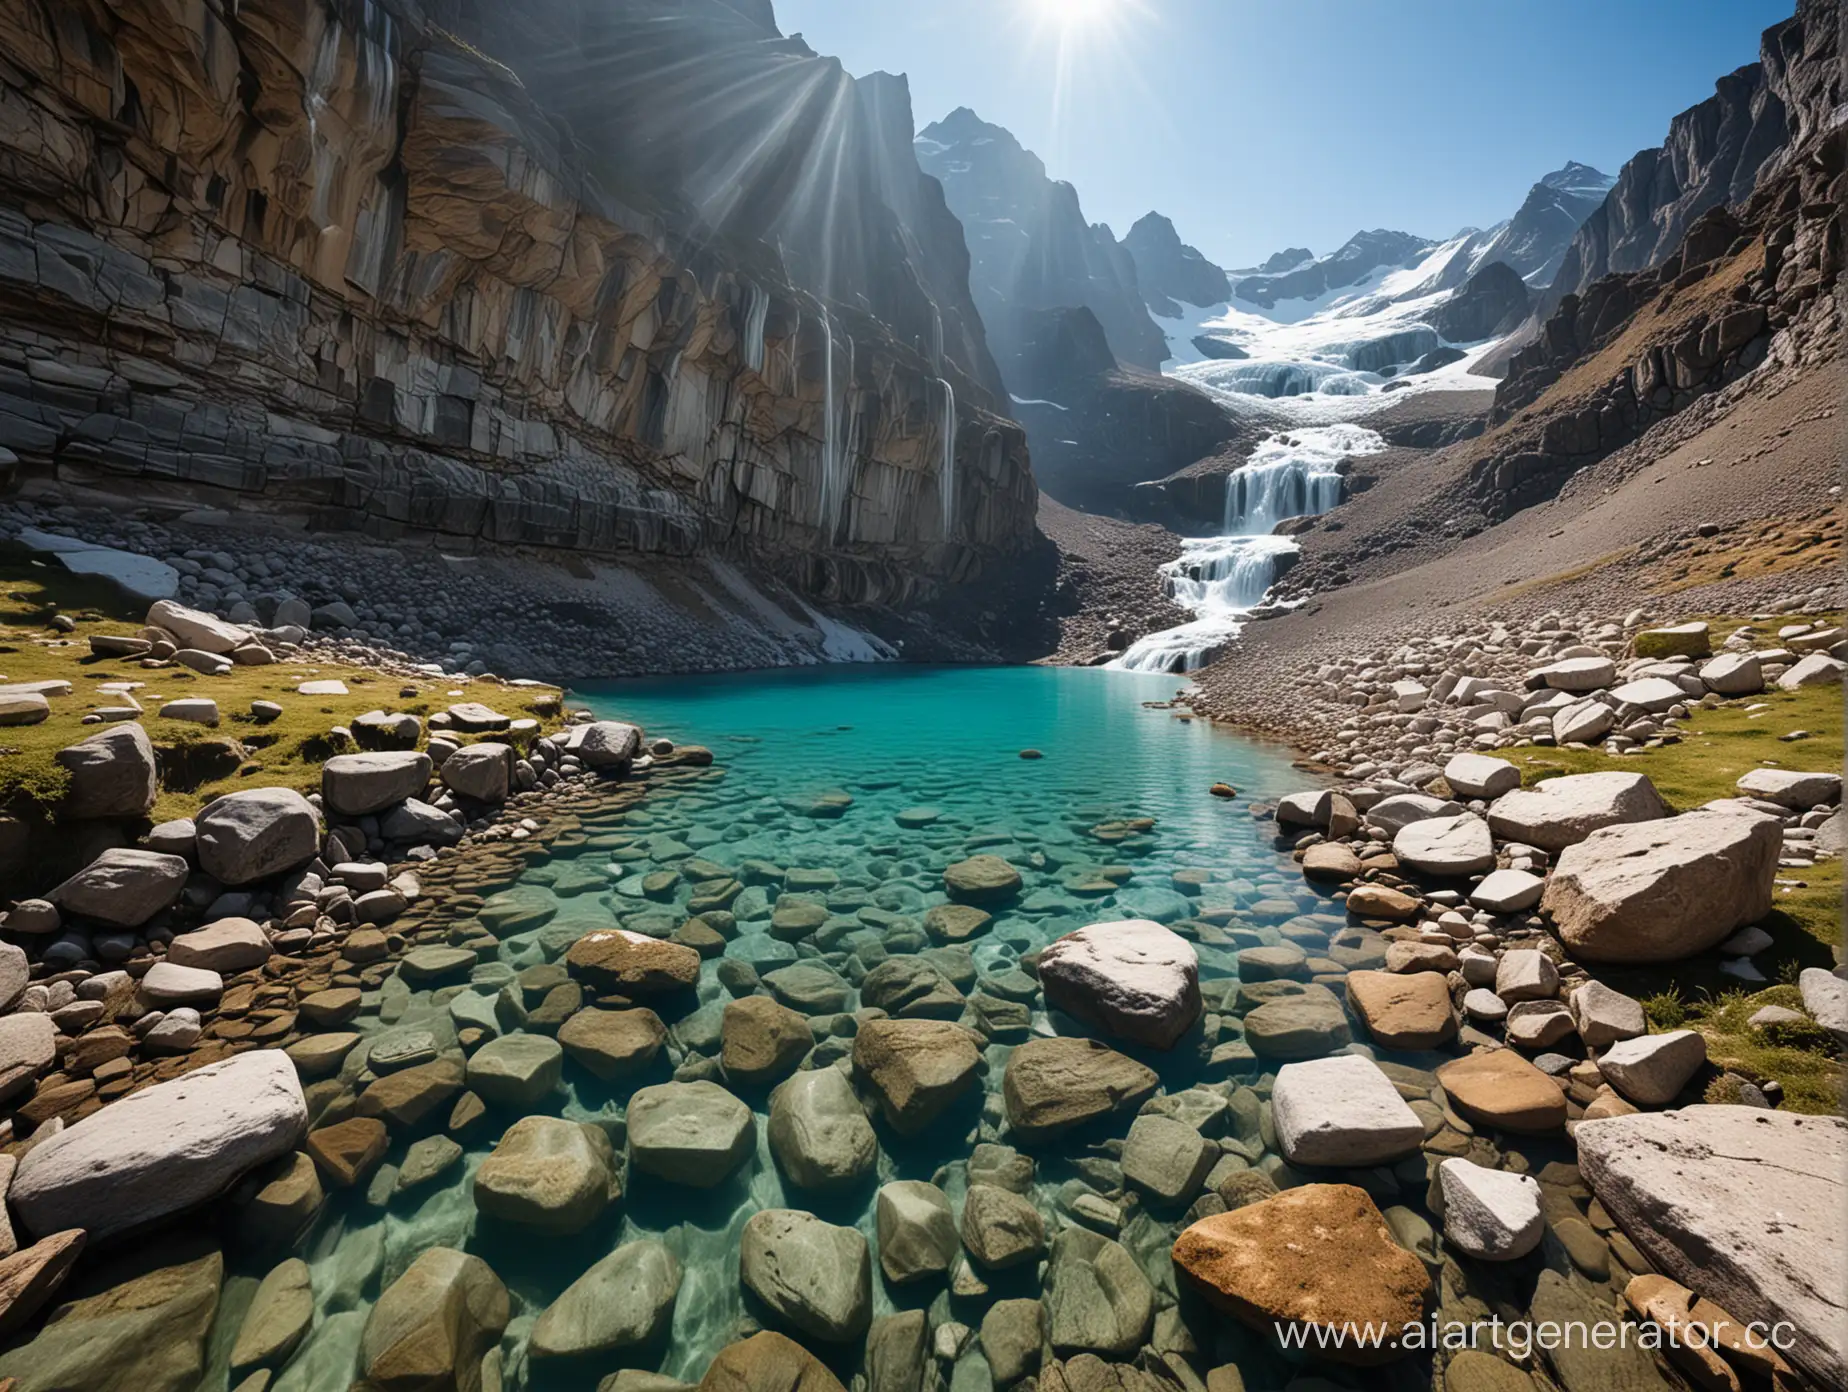 Crystal-Clear-Mountain-Spring-Emerging-from-Glacier-Amidst-Stony-Surroundings